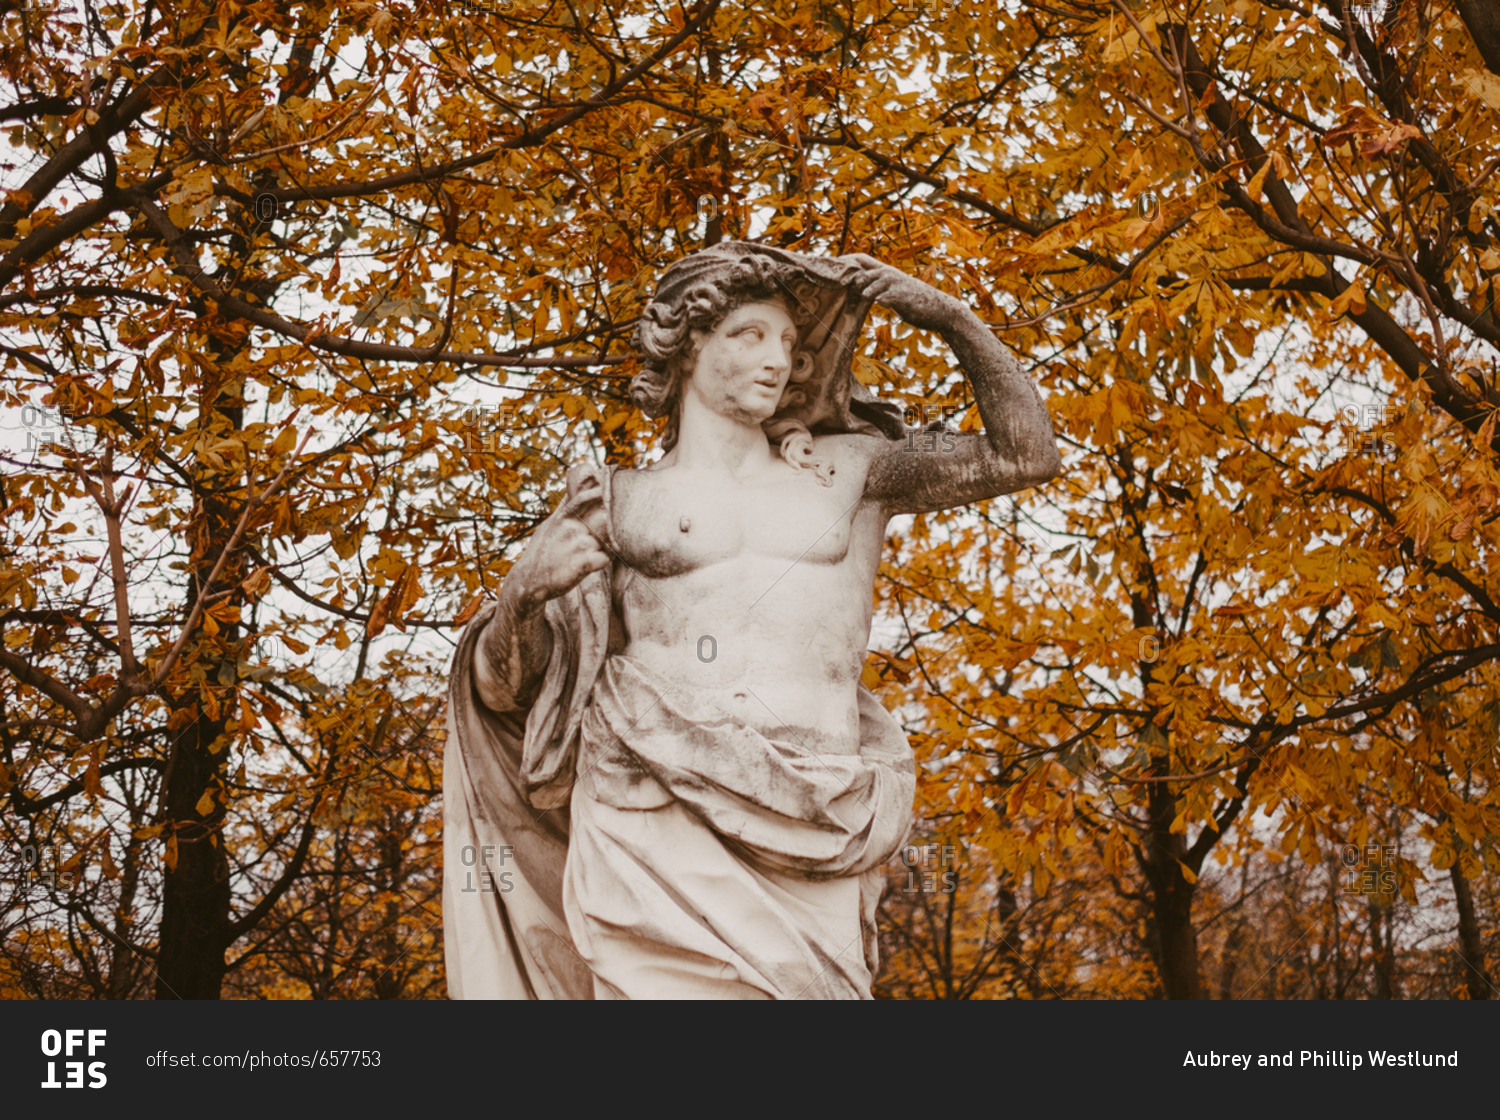 Sculpture in Tuileries garden with fall leaves in background